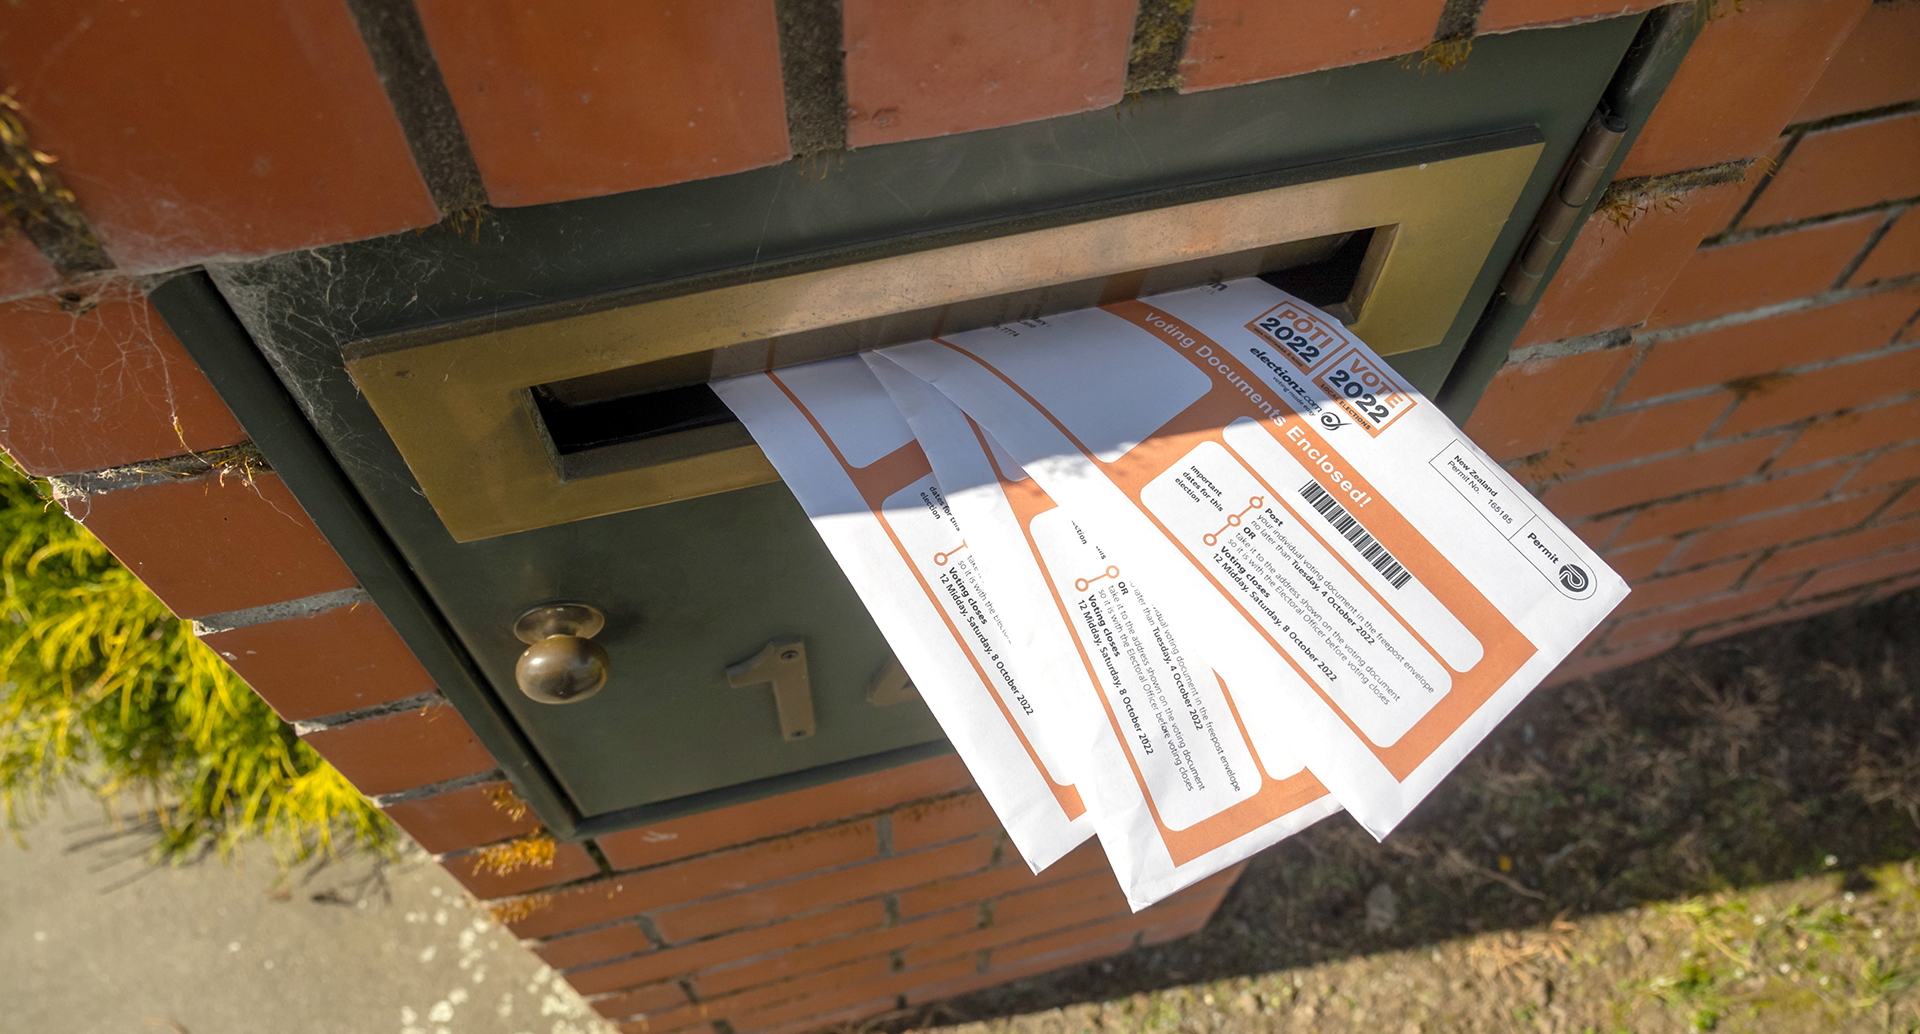 Voting papers in letterbox